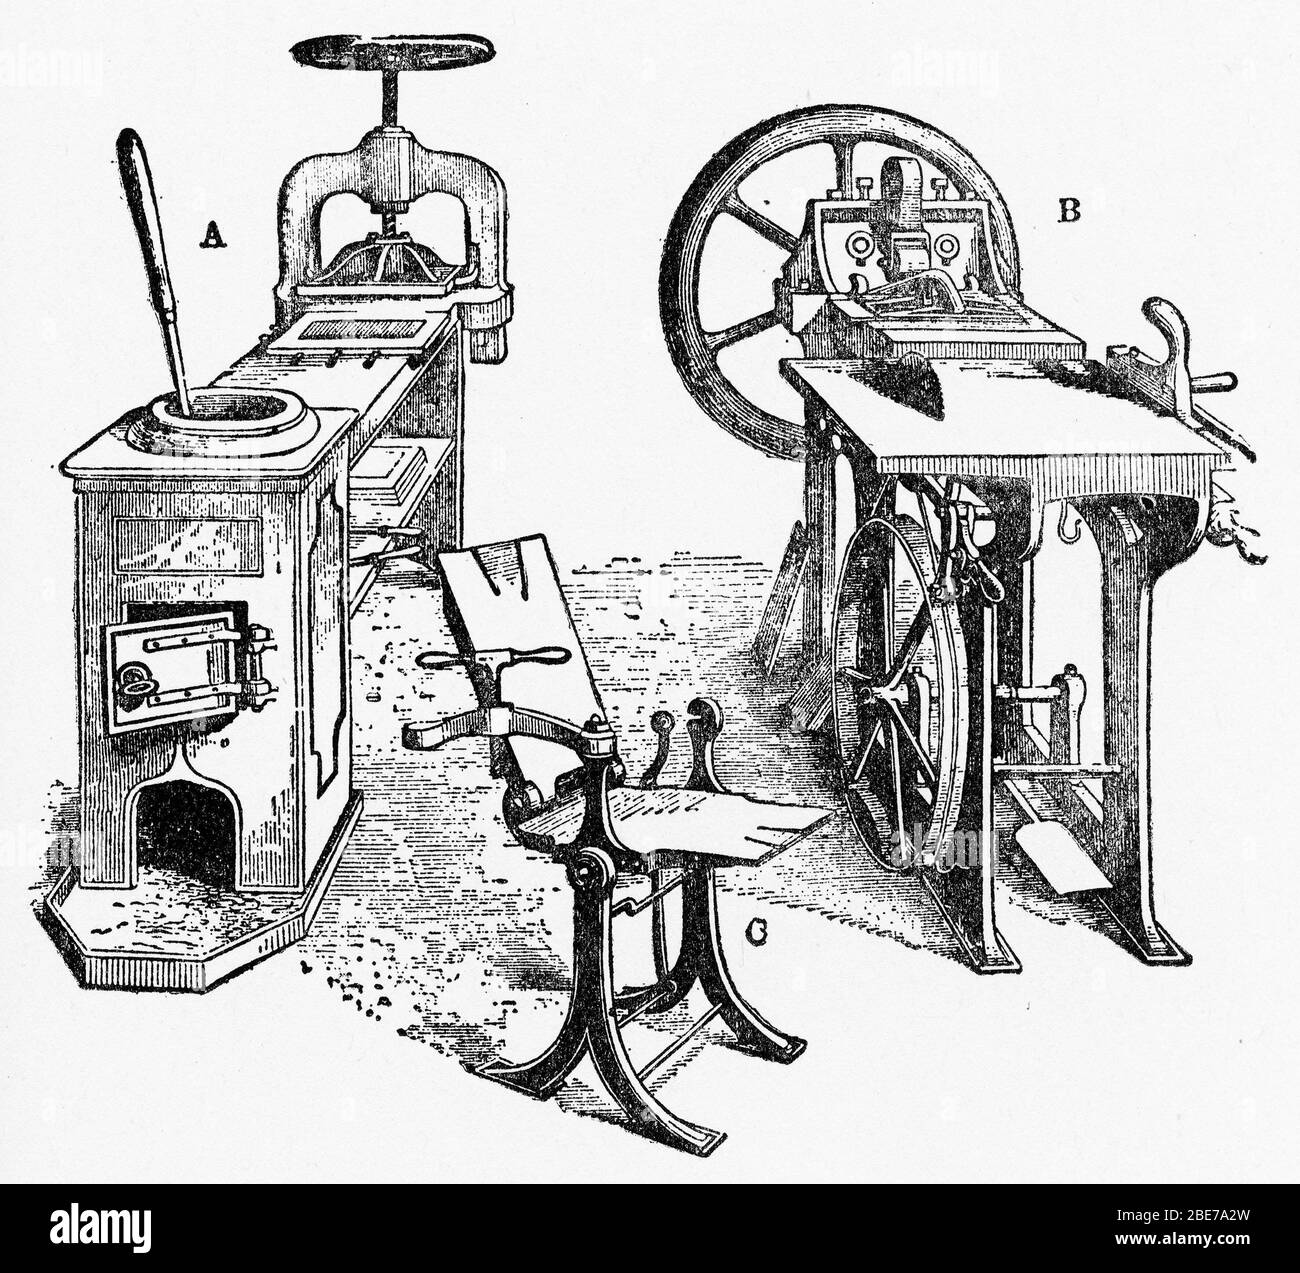 Engraving of small sized equipment used in a stereotype foundry to reproduce the plates of printed type used for making books. A is a metal pot, drying surface and press, B is the combination finishing table, and C is the casting box. Stock Photo